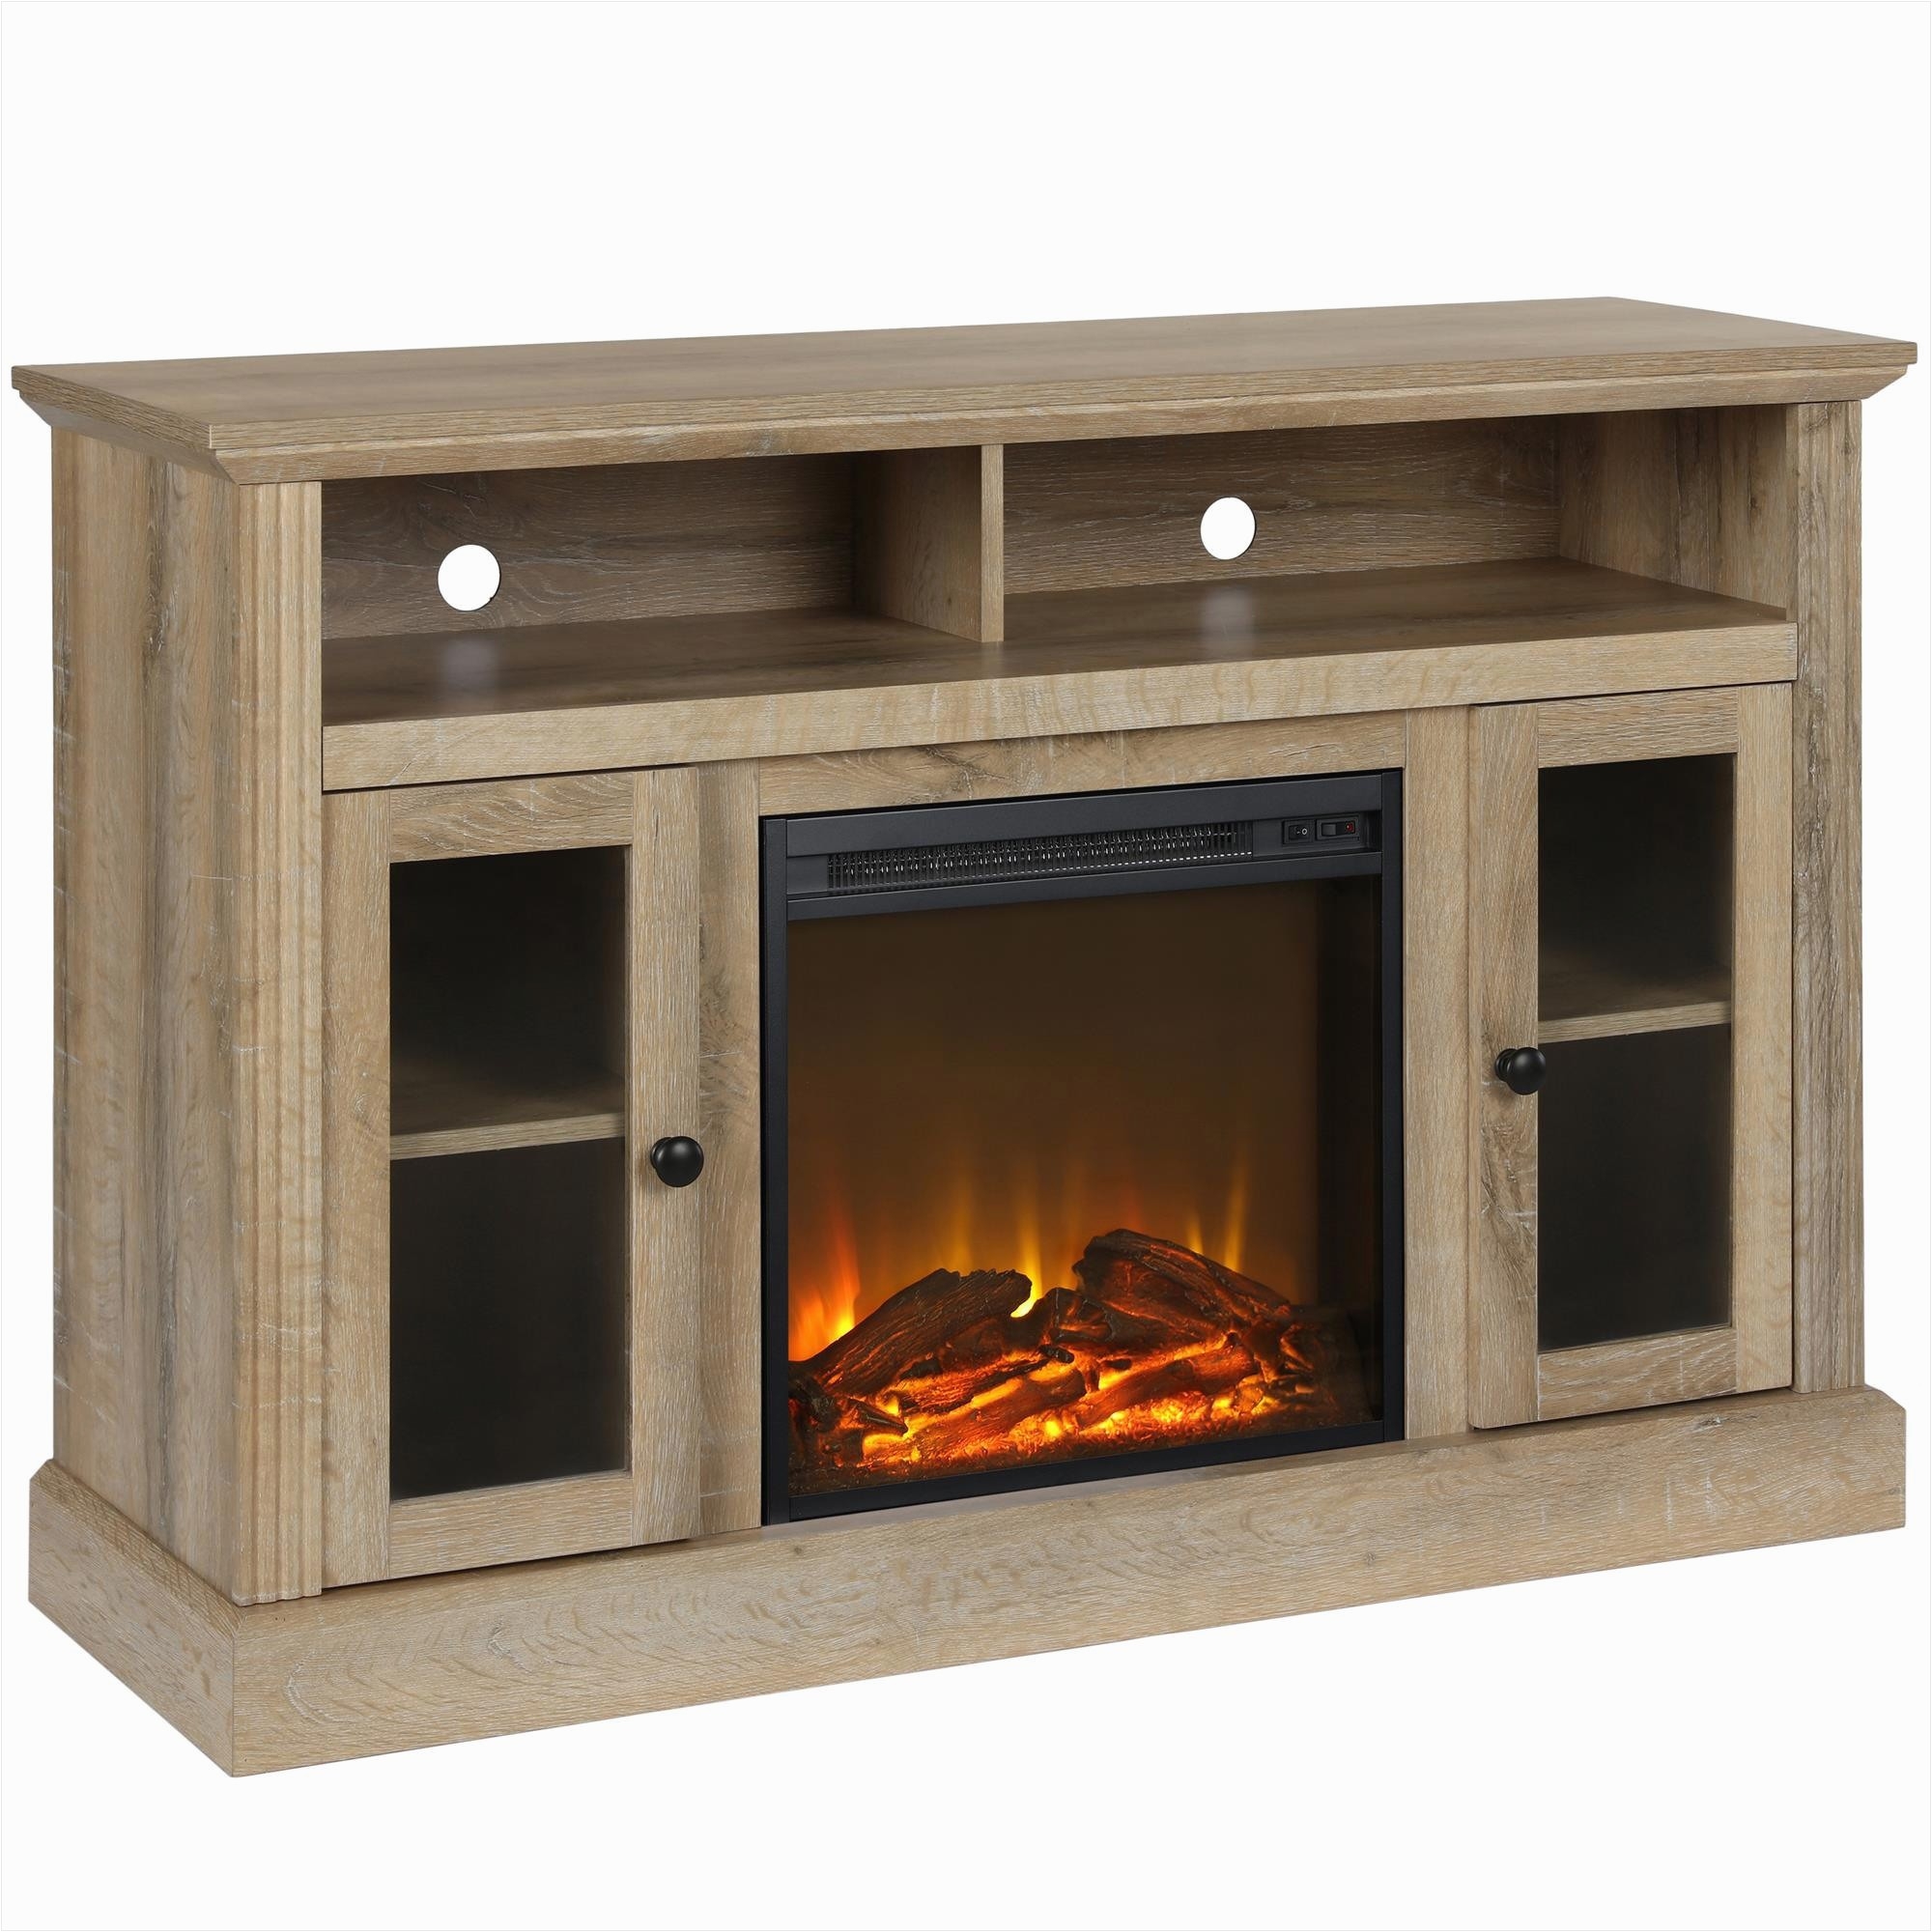 Gas Fireplace Frame Best Of White Mantel Gas Fireplace